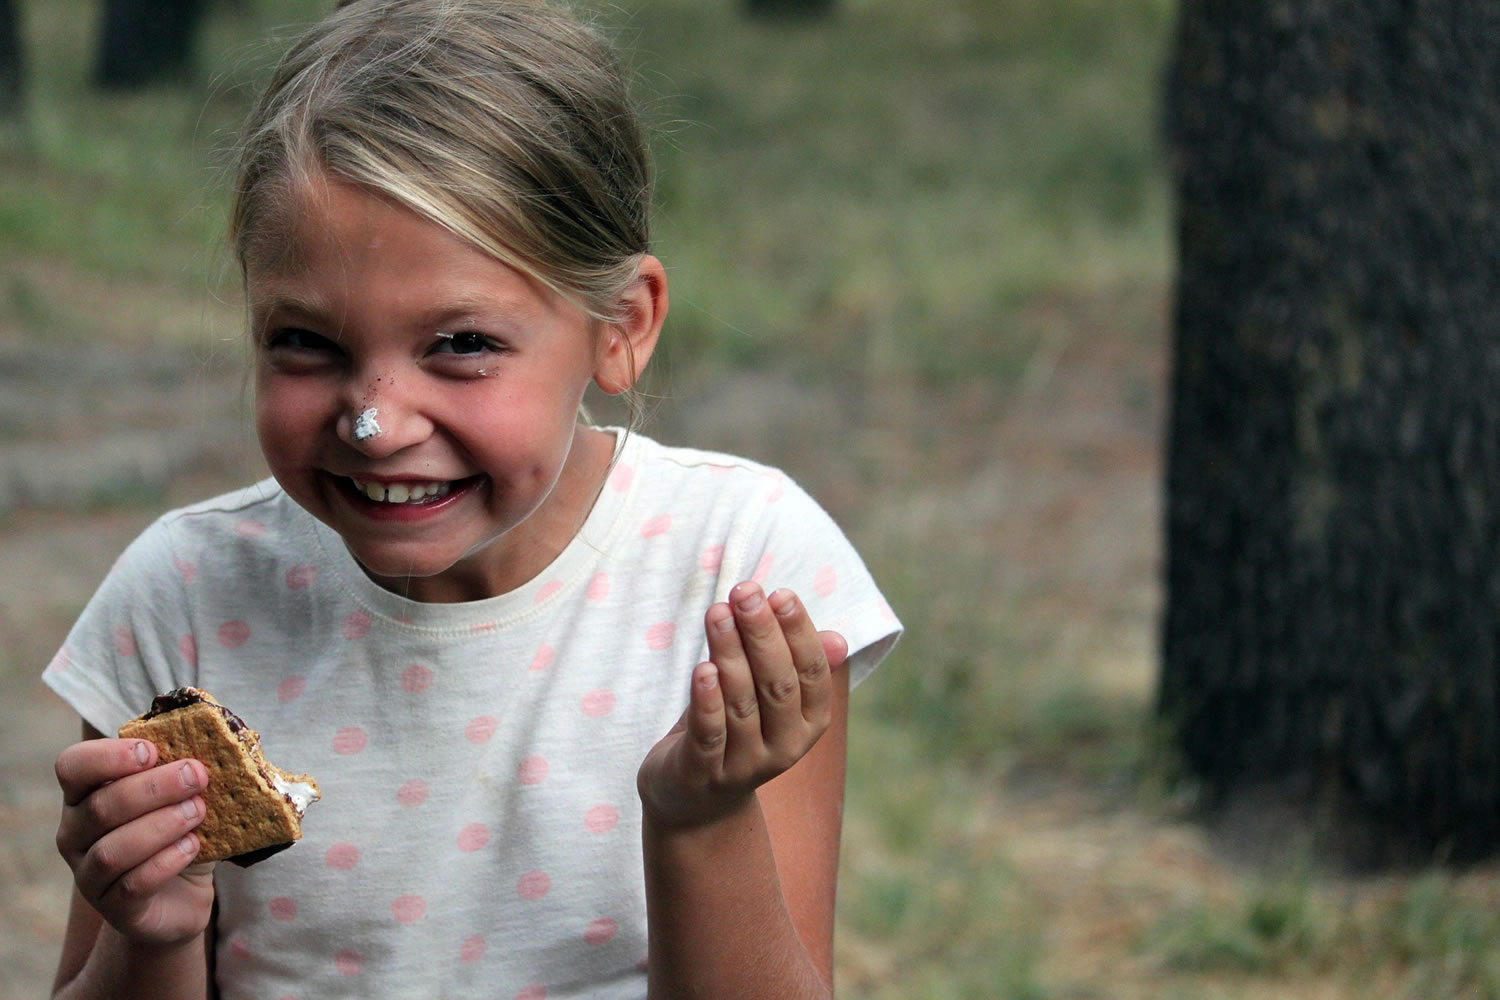 The Treasure Valley Family YMCA
A camper enjoys a s'more during summer cookout night at Adventure Camp in Cascade, Idaho. YMCA summer camps have been around for more than a century, and number more than 300 overnight camps and many day camps.